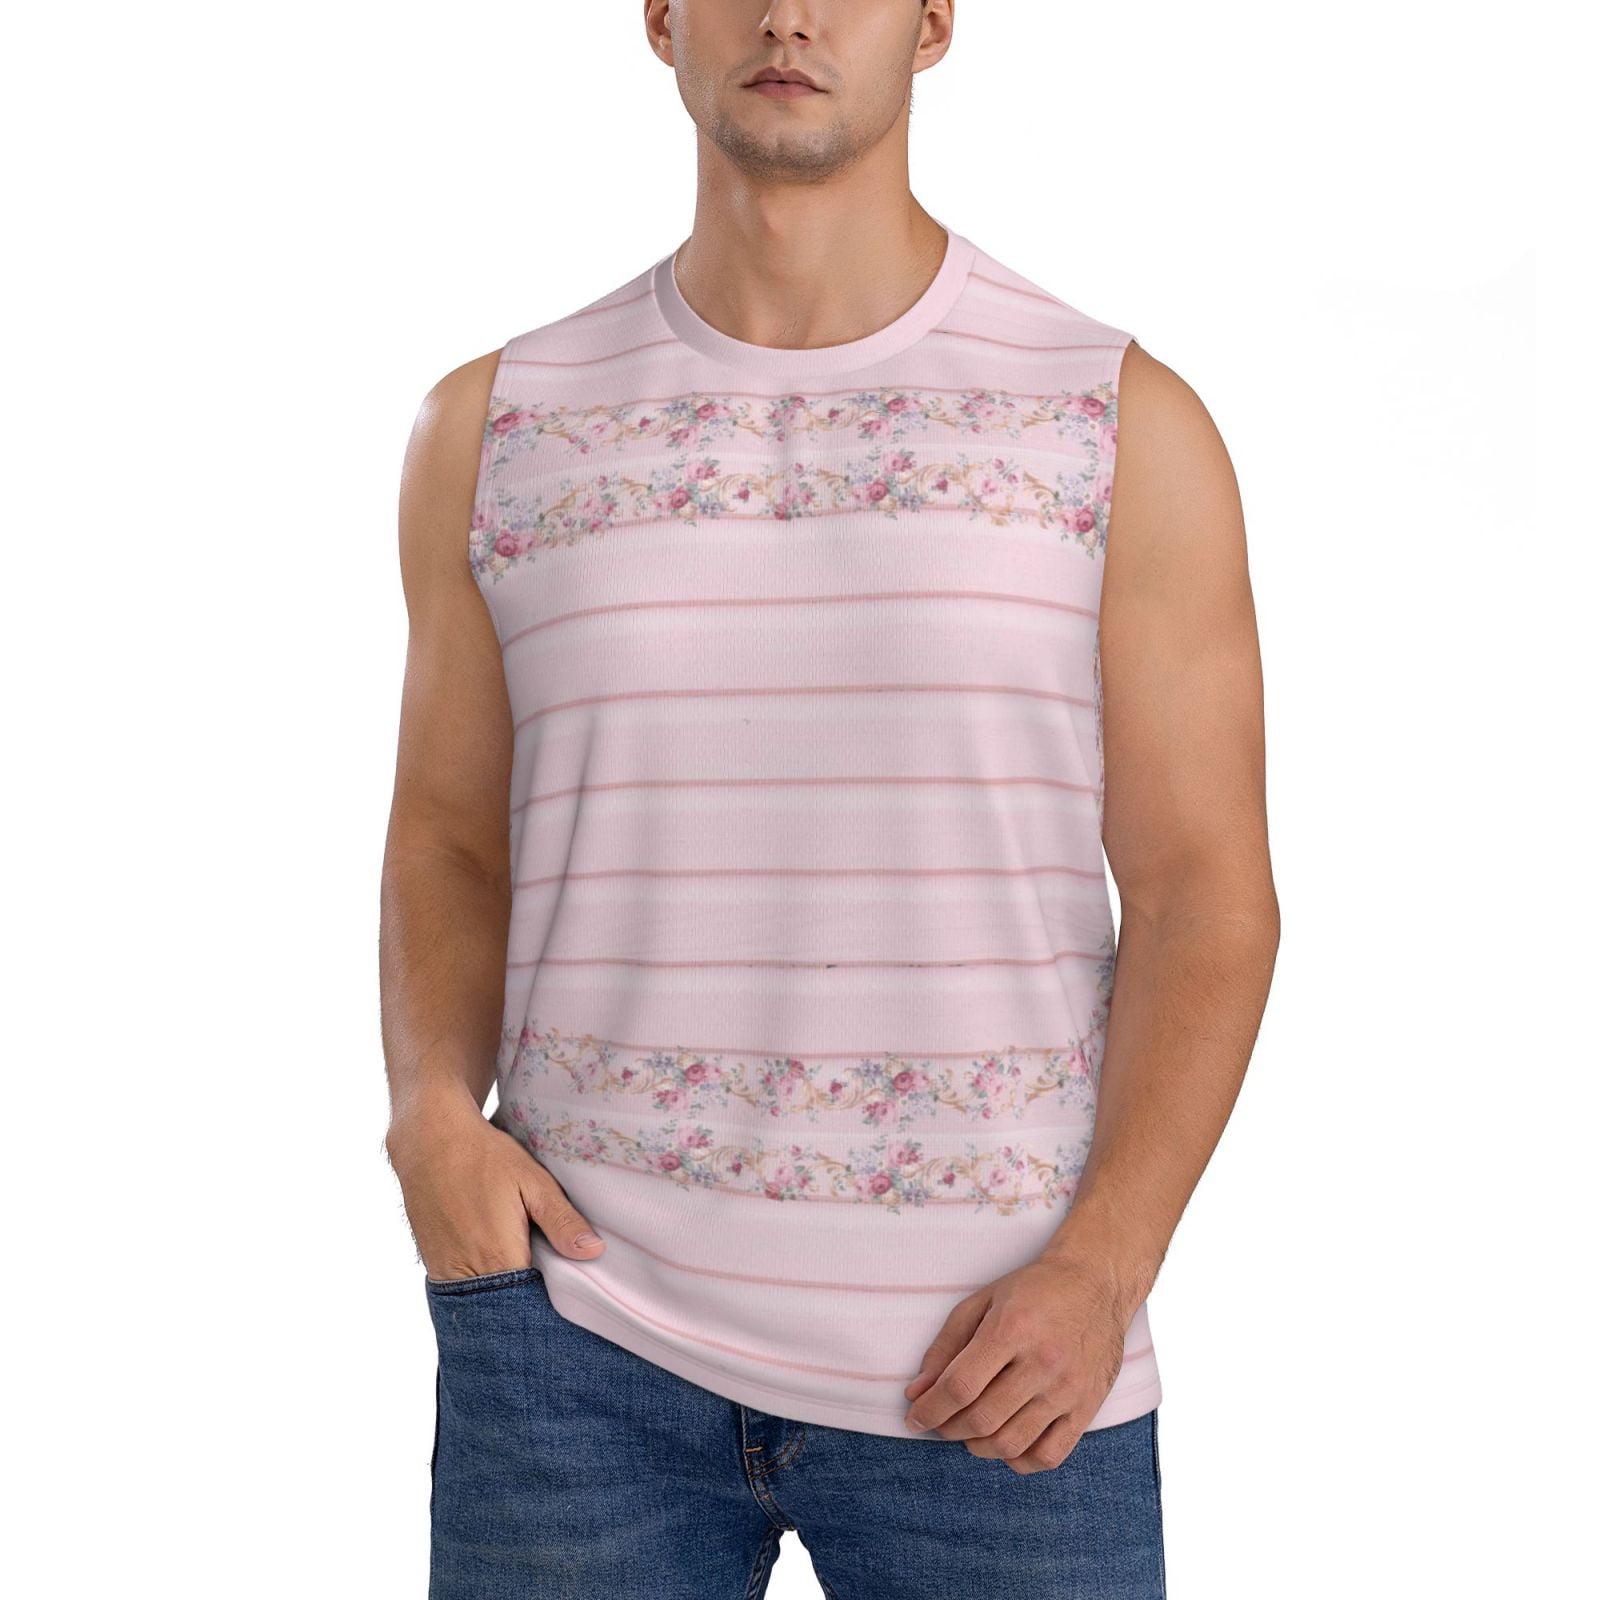 Disketp Pink Flower Board Sleeveless Tshirts For Men, Muscle Shirts For ...